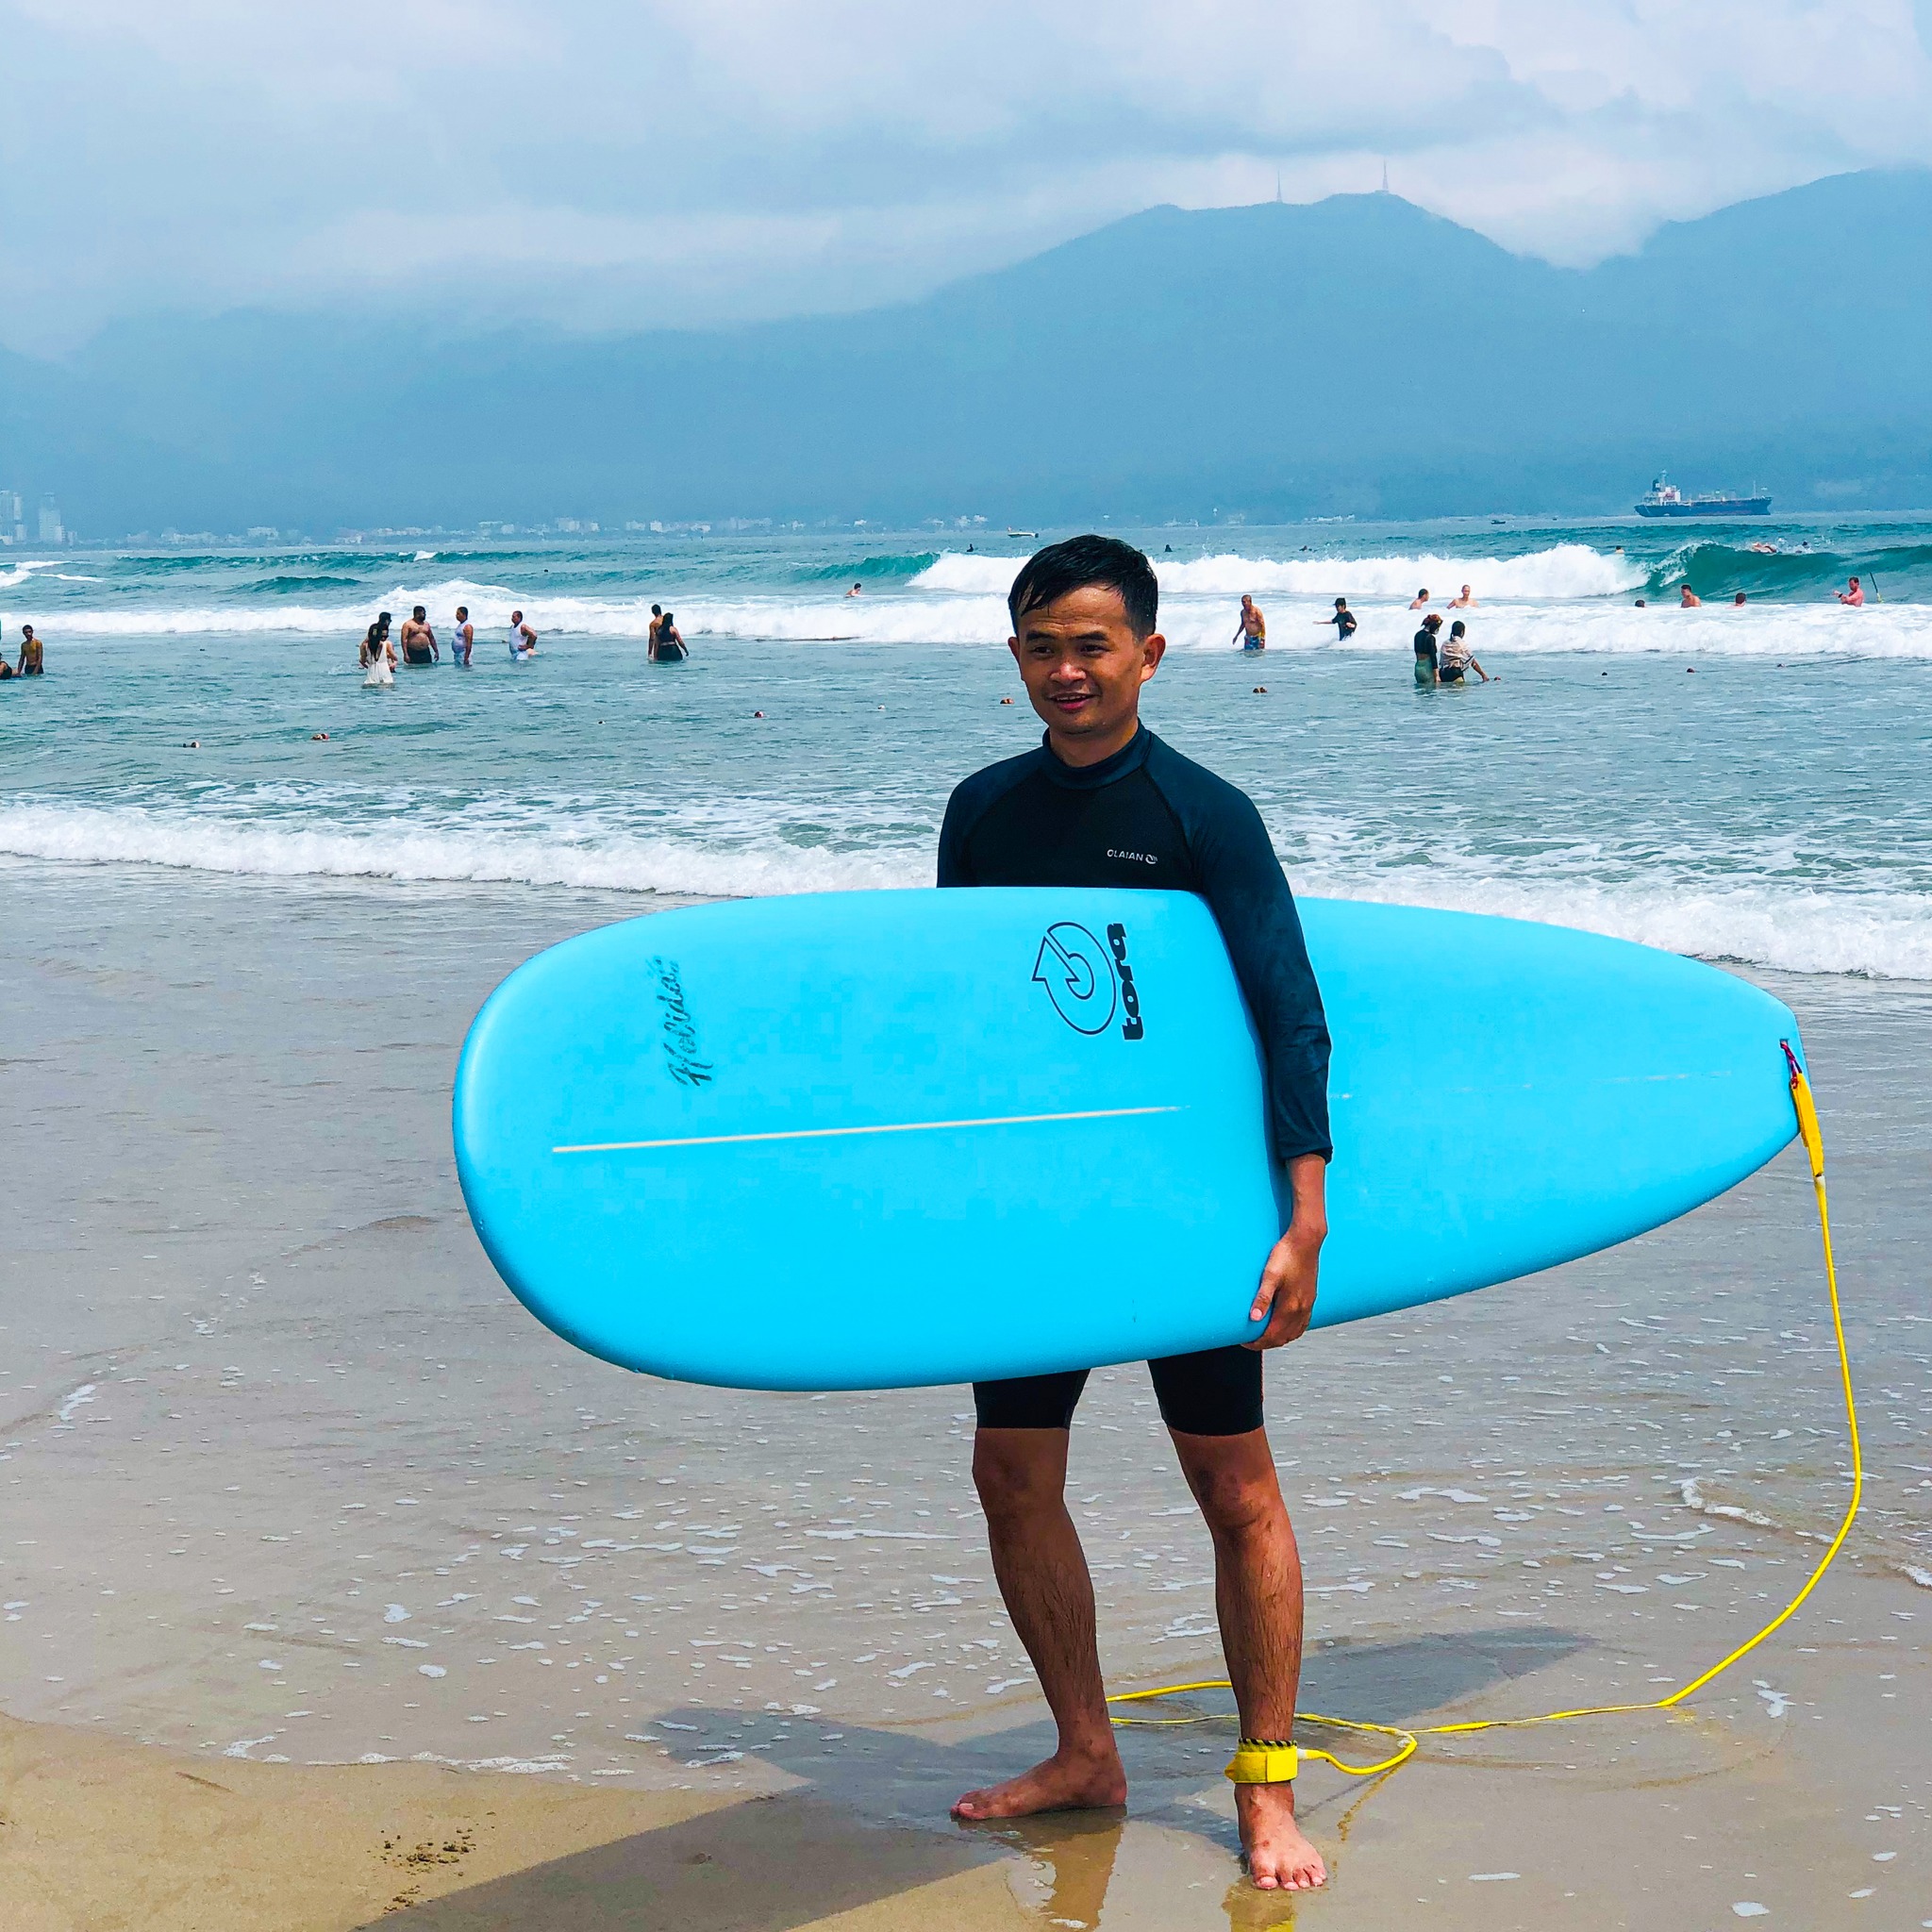 Surfing: Anyone who wants to try more sporty activities can't miss surfing. In Da Nang, there are surfing classes with kites, boards, windsurfing... to help you practice and practice this subject right away. Some places where you can surf here are My Khe beach, Nam O reef, Nuoc beach...